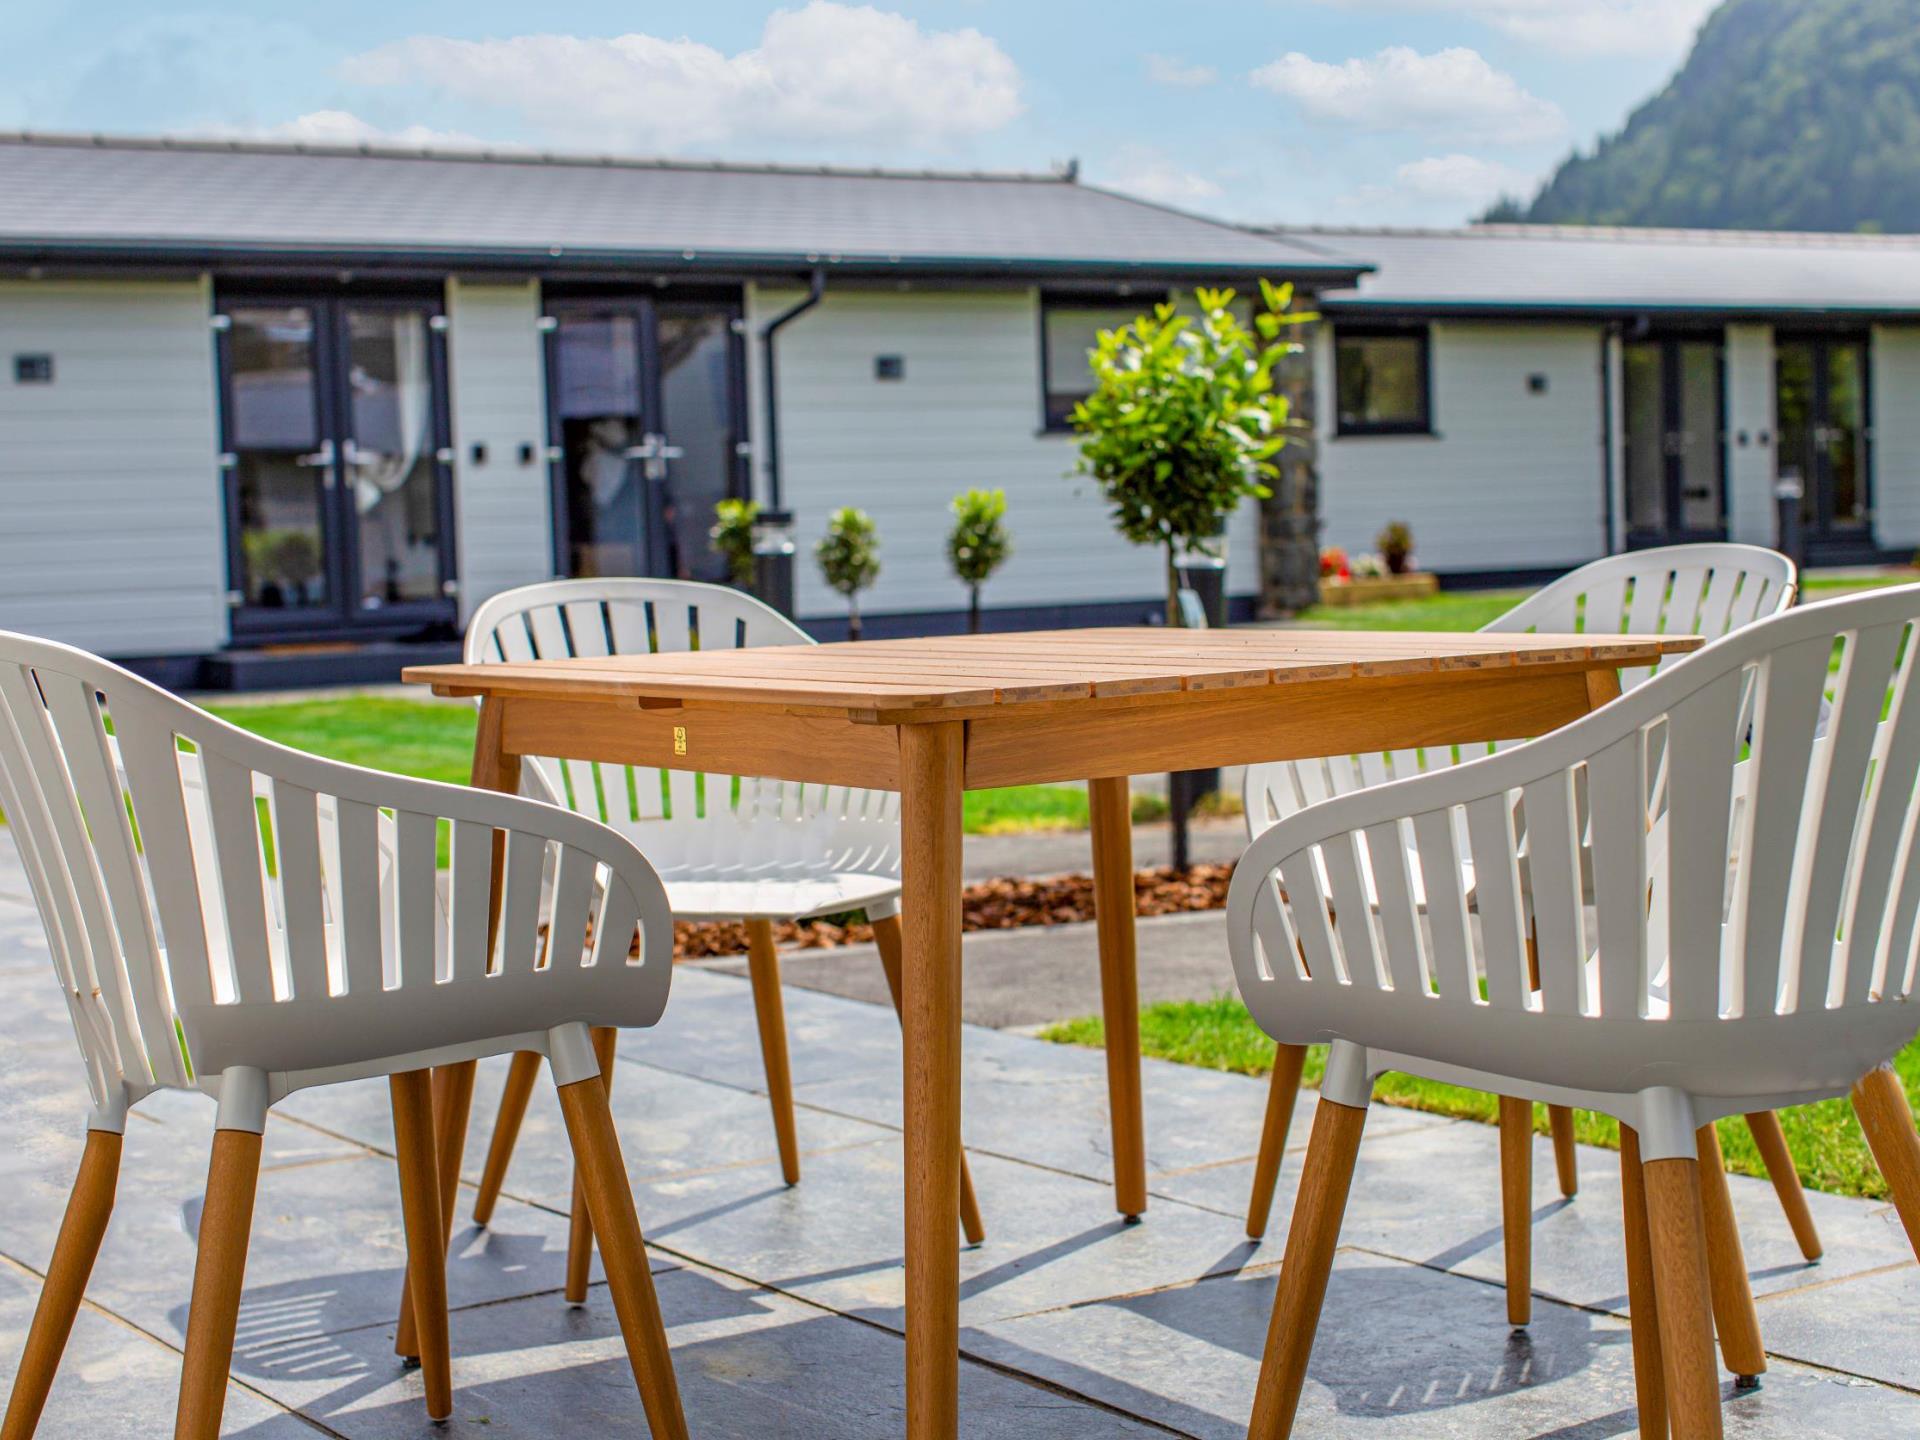 Outdoor dining terrace at Rwst Holiday Lodge Park